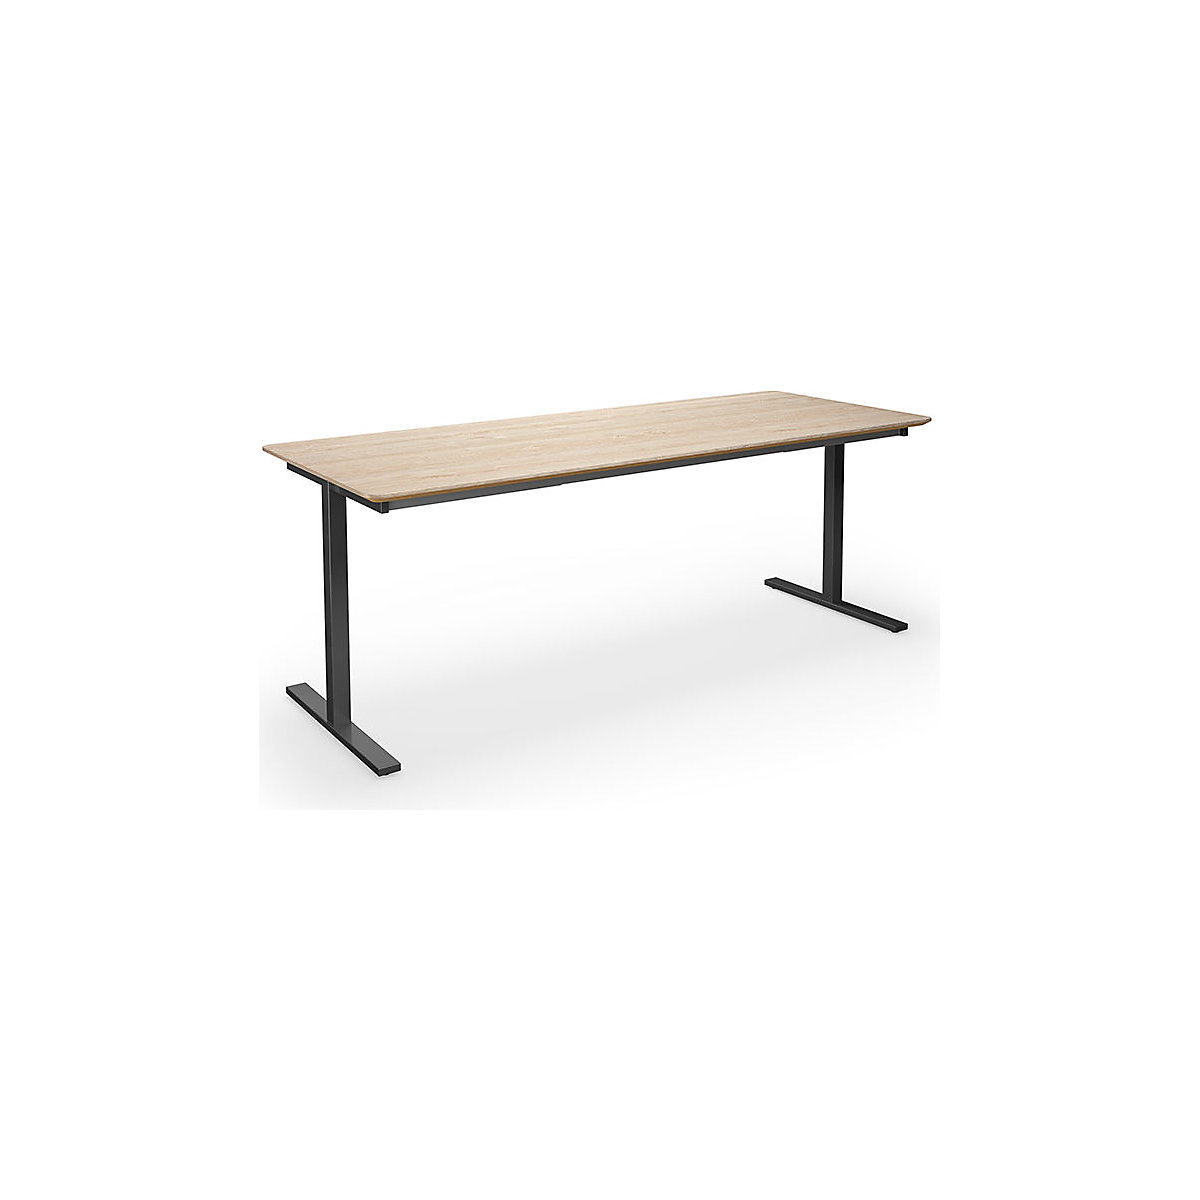 DUO-T Trend multi-purpose desk, straight tabletop, rounded corners